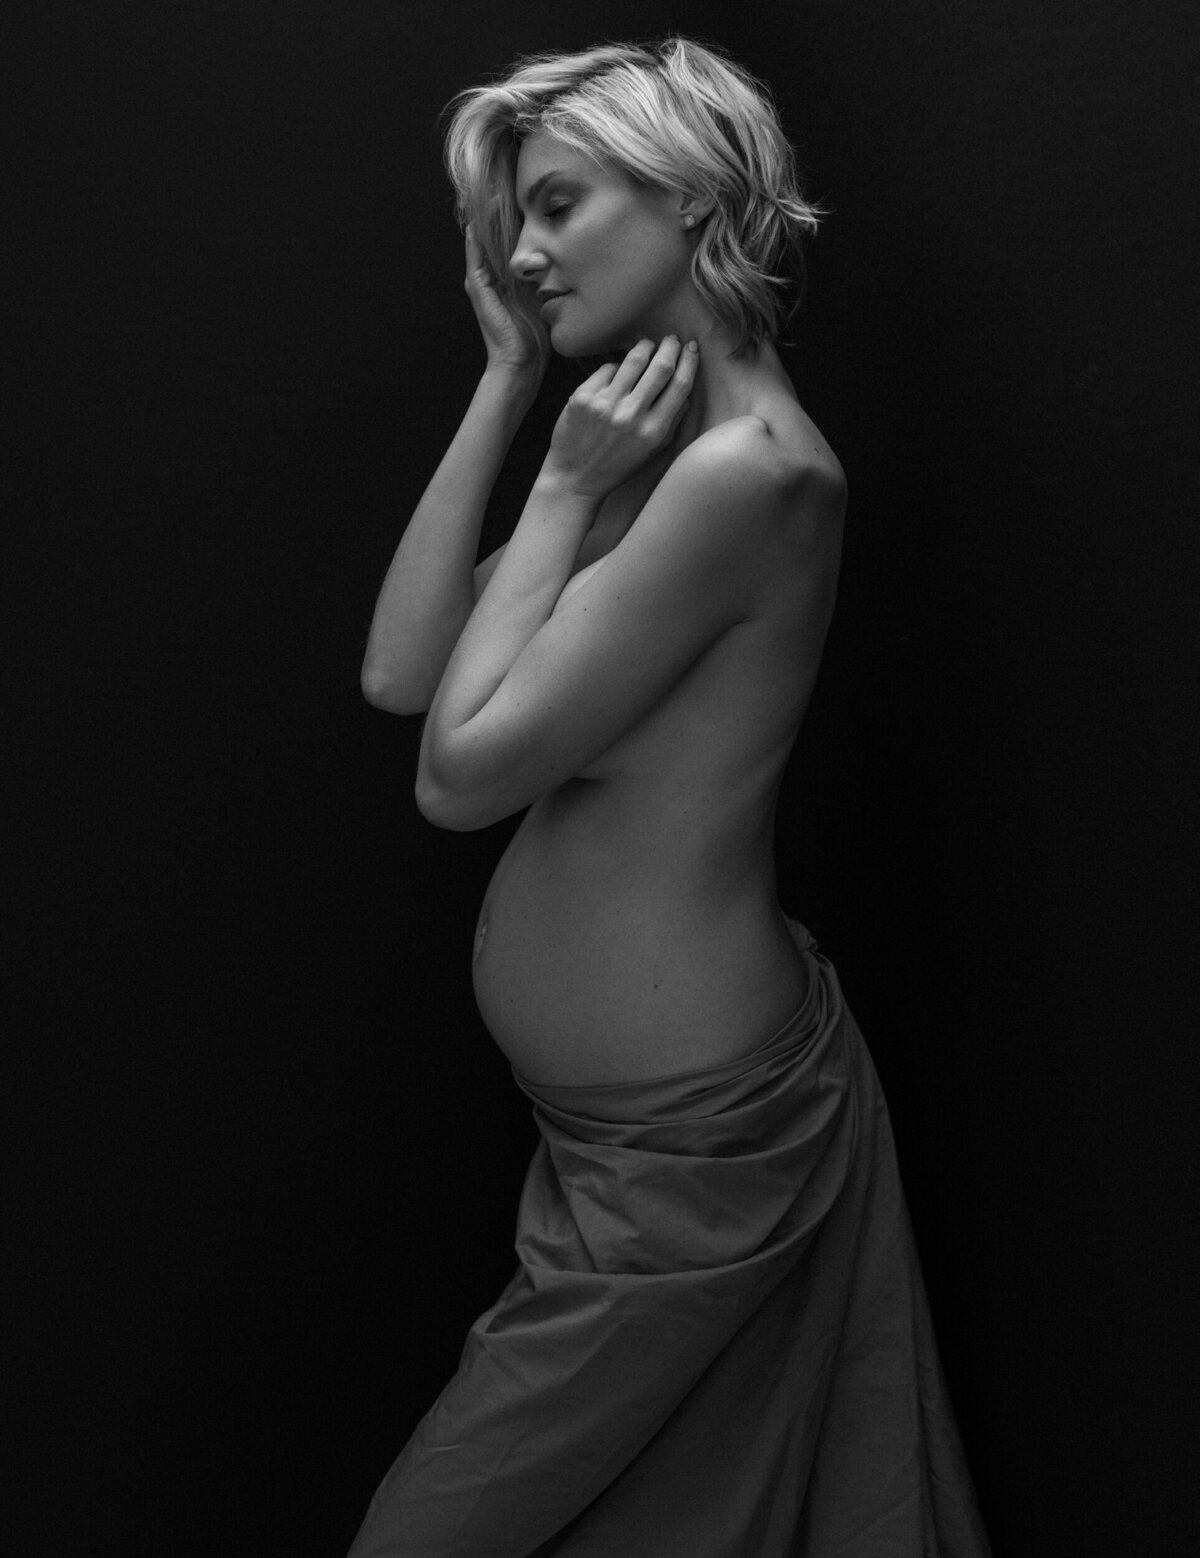 Artistic Lighting for Maternity Photography Course by Lola Melani-13